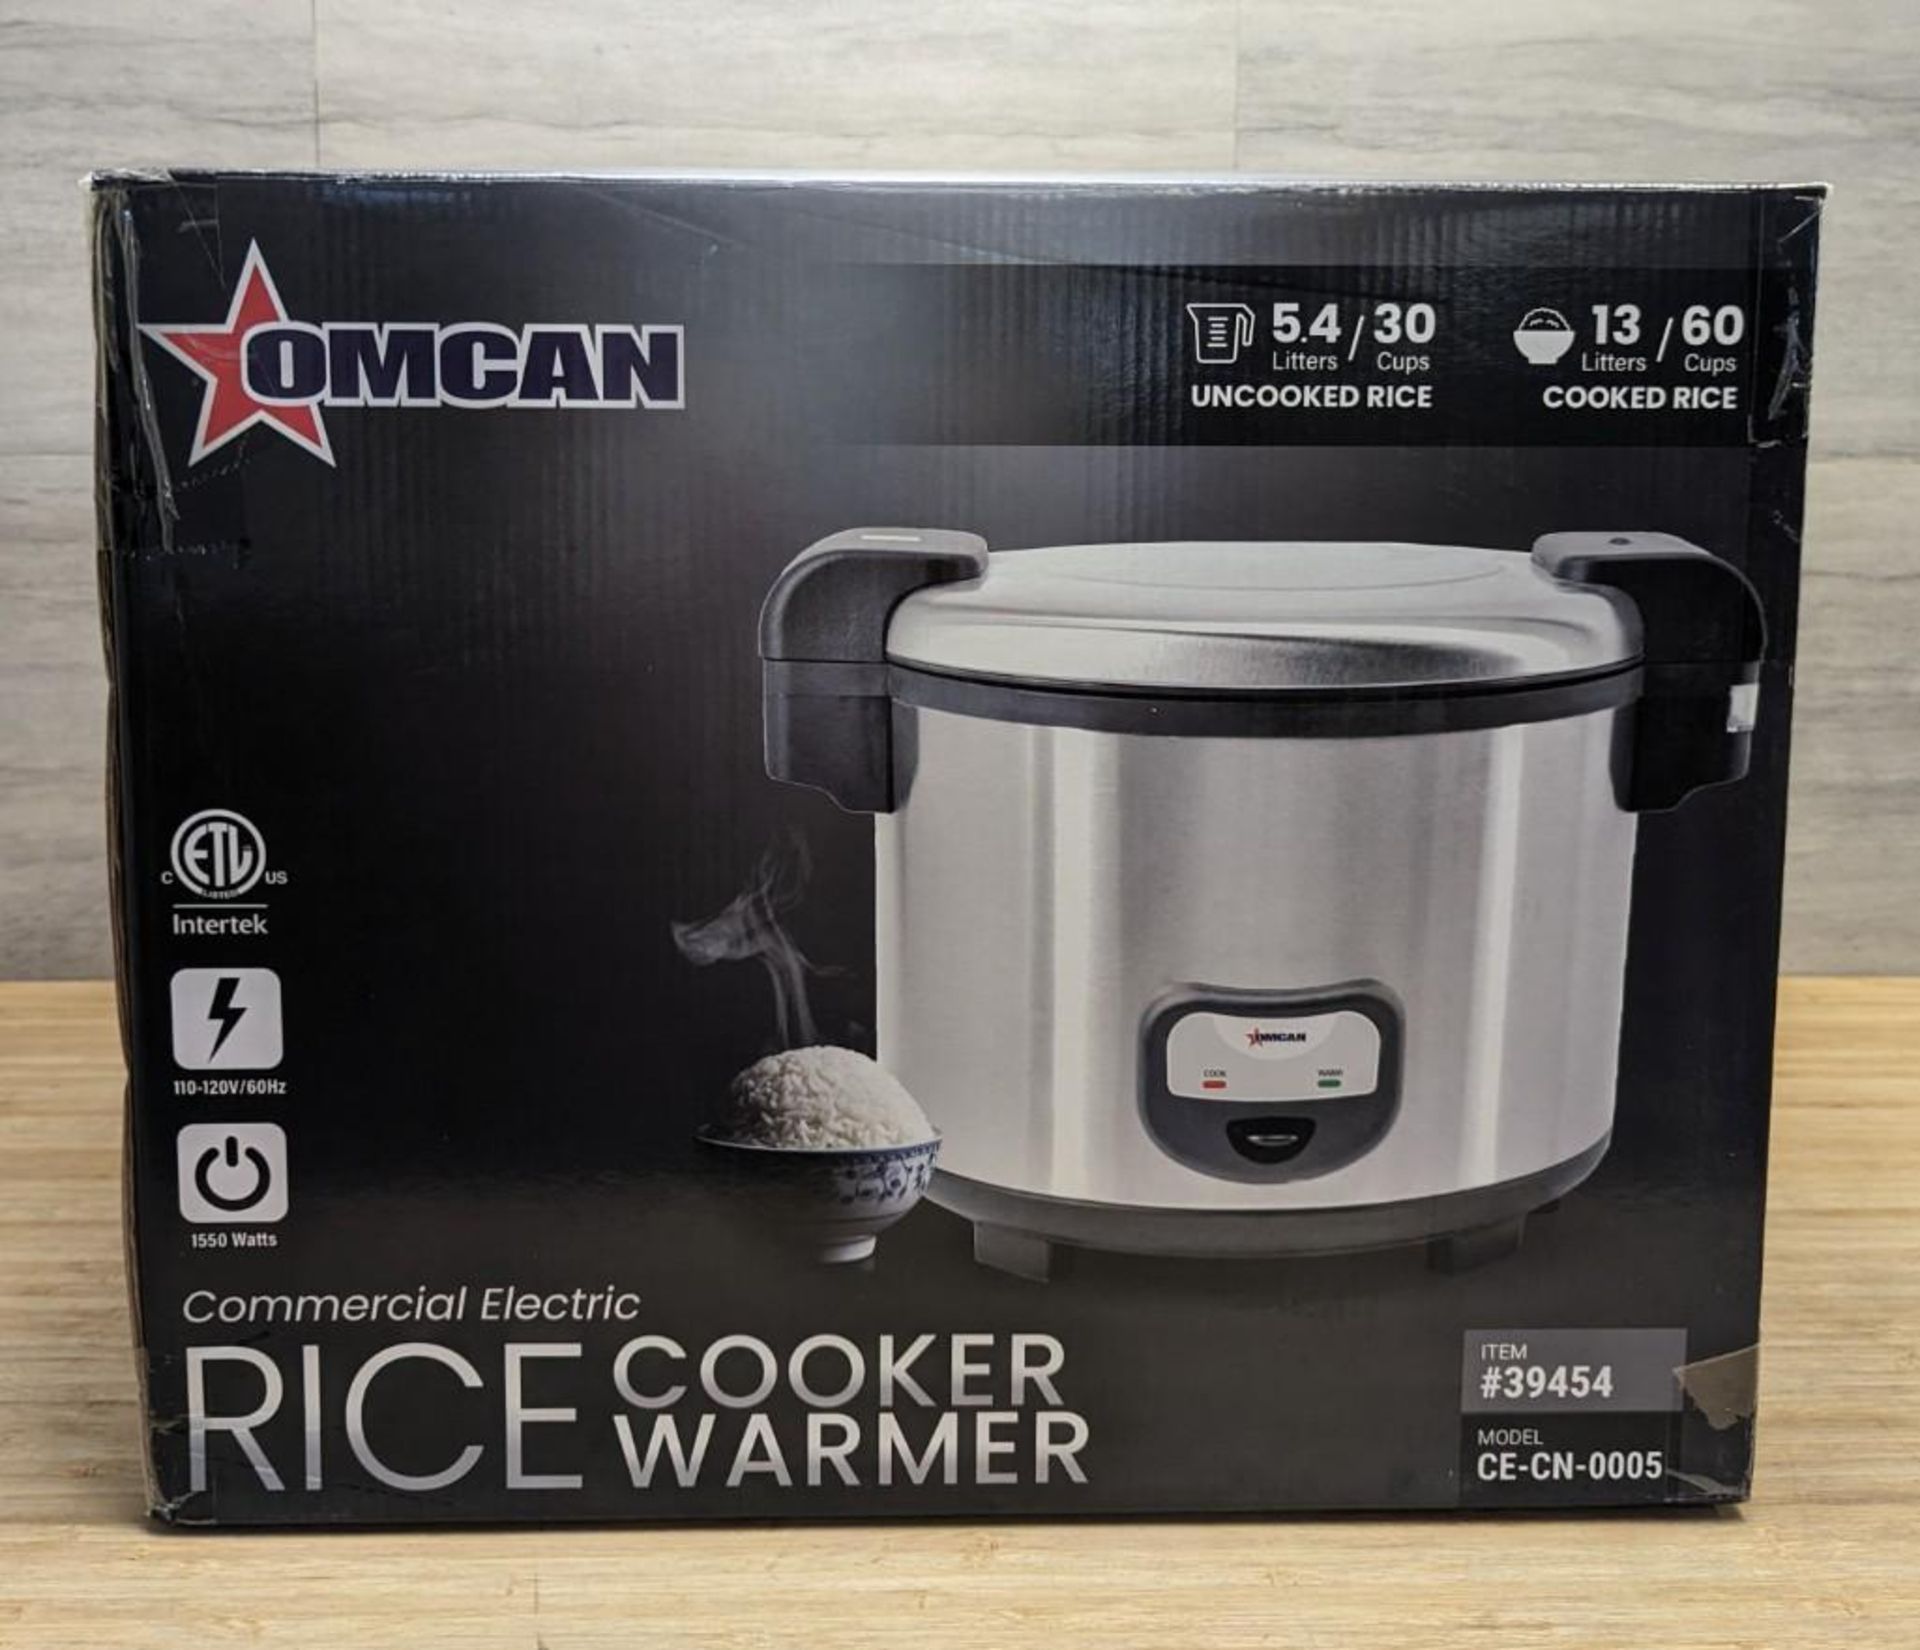 60 CUP COMMERCIAL RICE COOKER/WARMER, OMCAN 39454 - NEW - Image 10 of 10